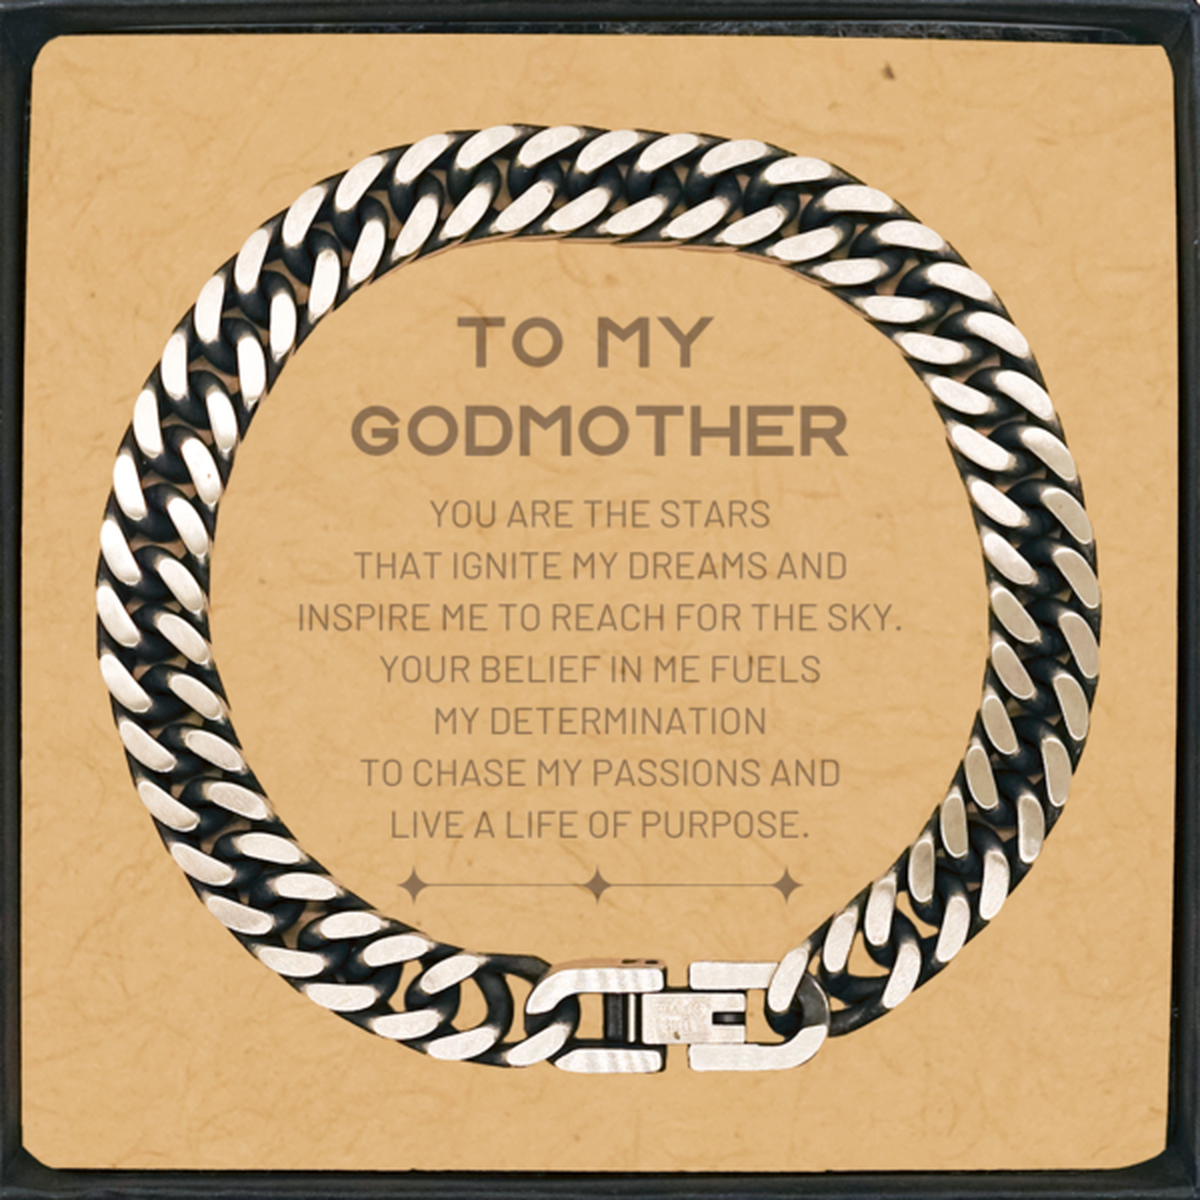 To My Godmother Cuban Link Chain Bracelet, You are the stars that ignite my dreams and inspire me to reach for the sky, Birthday Unique Gifts For Godmother, Thank You Gifts For Godmother